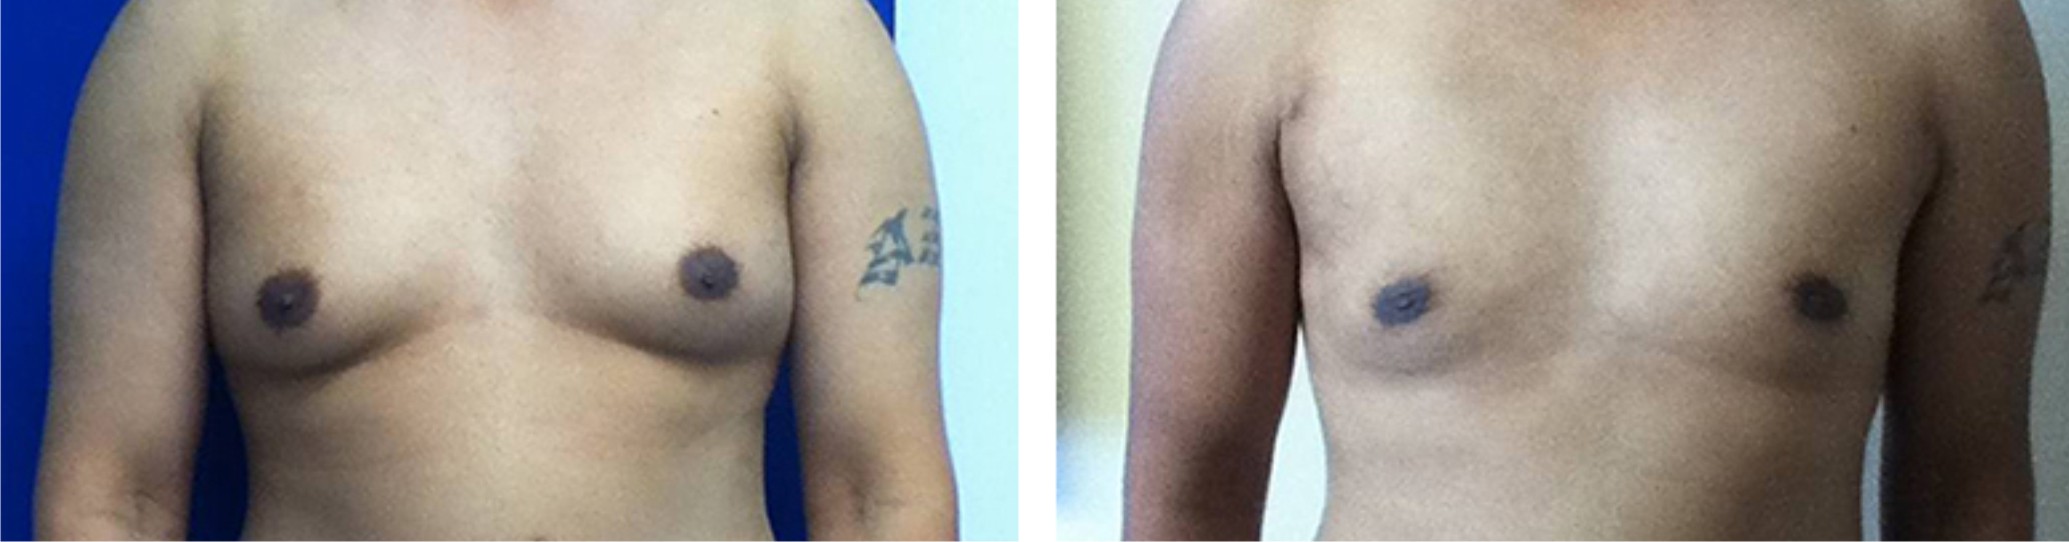 Male Breast Reduction Image Two